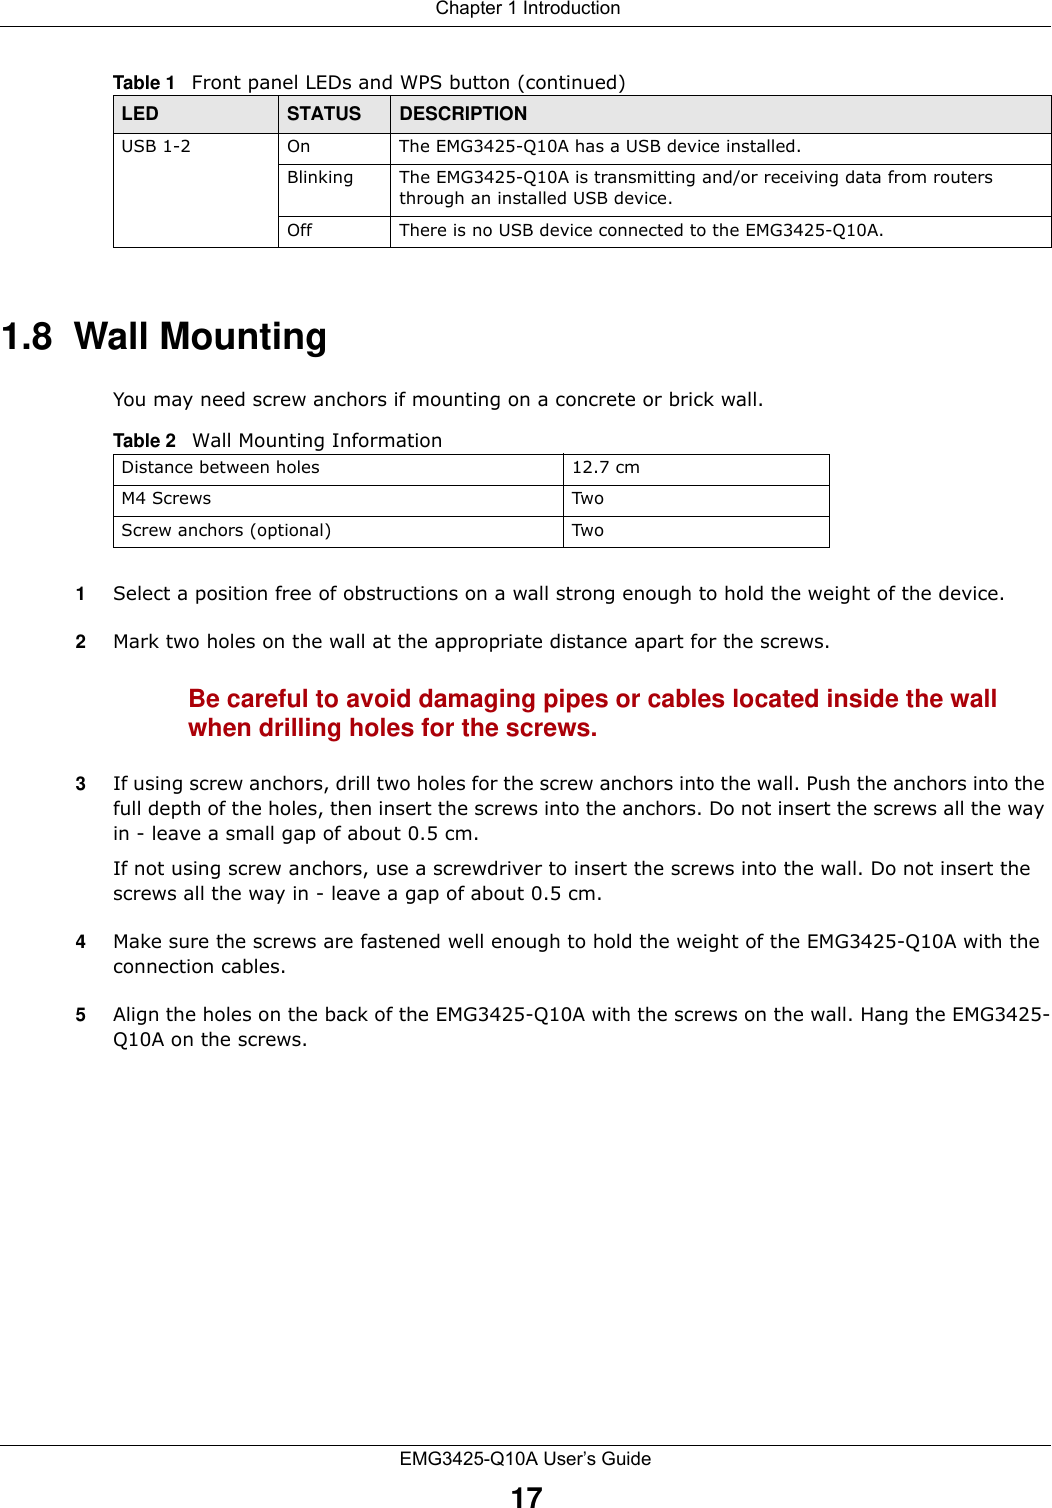  Chapter 1 IntroductionEMG3425-Q10A User’s Guide171.8  Wall MountingYou may need screw anchors if mounting on a concrete or brick wall.1Select a position free of obstructions on a wall strong enough to hold the weight of the device. 2Mark two holes on the wall at the appropriate distance apart for the screws.Be careful to avoid damaging pipes or cables located inside the wall when drilling holes for the screws.3If using screw anchors, drill two holes for the screw anchors into the wall. Push the anchors into the full depth of the holes, then insert the screws into the anchors. Do not insert the screws all the way in - leave a small gap of about 0.5 cm.If not using screw anchors, use a screwdriver to insert the screws into the wall. Do not insert the screws all the way in - leave a gap of about 0.5 cm.4Make sure the screws are fastened well enough to hold the weight of the EMG3425-Q10A with the connection cables. 5Align the holes on the back of the EMG3425-Q10A with the screws on the wall. Hang the EMG3425-Q10A on the screws.USB 1-2 On The EMG3425-Q10A has a USB device installed.Blinking The EMG3425-Q10A is transmitting and/or receiving data from routers through an installed USB device.Off There is no USB device connected to the EMG3425-Q10A.Table 1   Front panel LEDs and WPS button (continued)LED STATUS DESCRIPTIONTable 2   Wall Mounting InformationDistance between holes 12.7 cmM4 Screws TwoScrew anchors (optional) Two